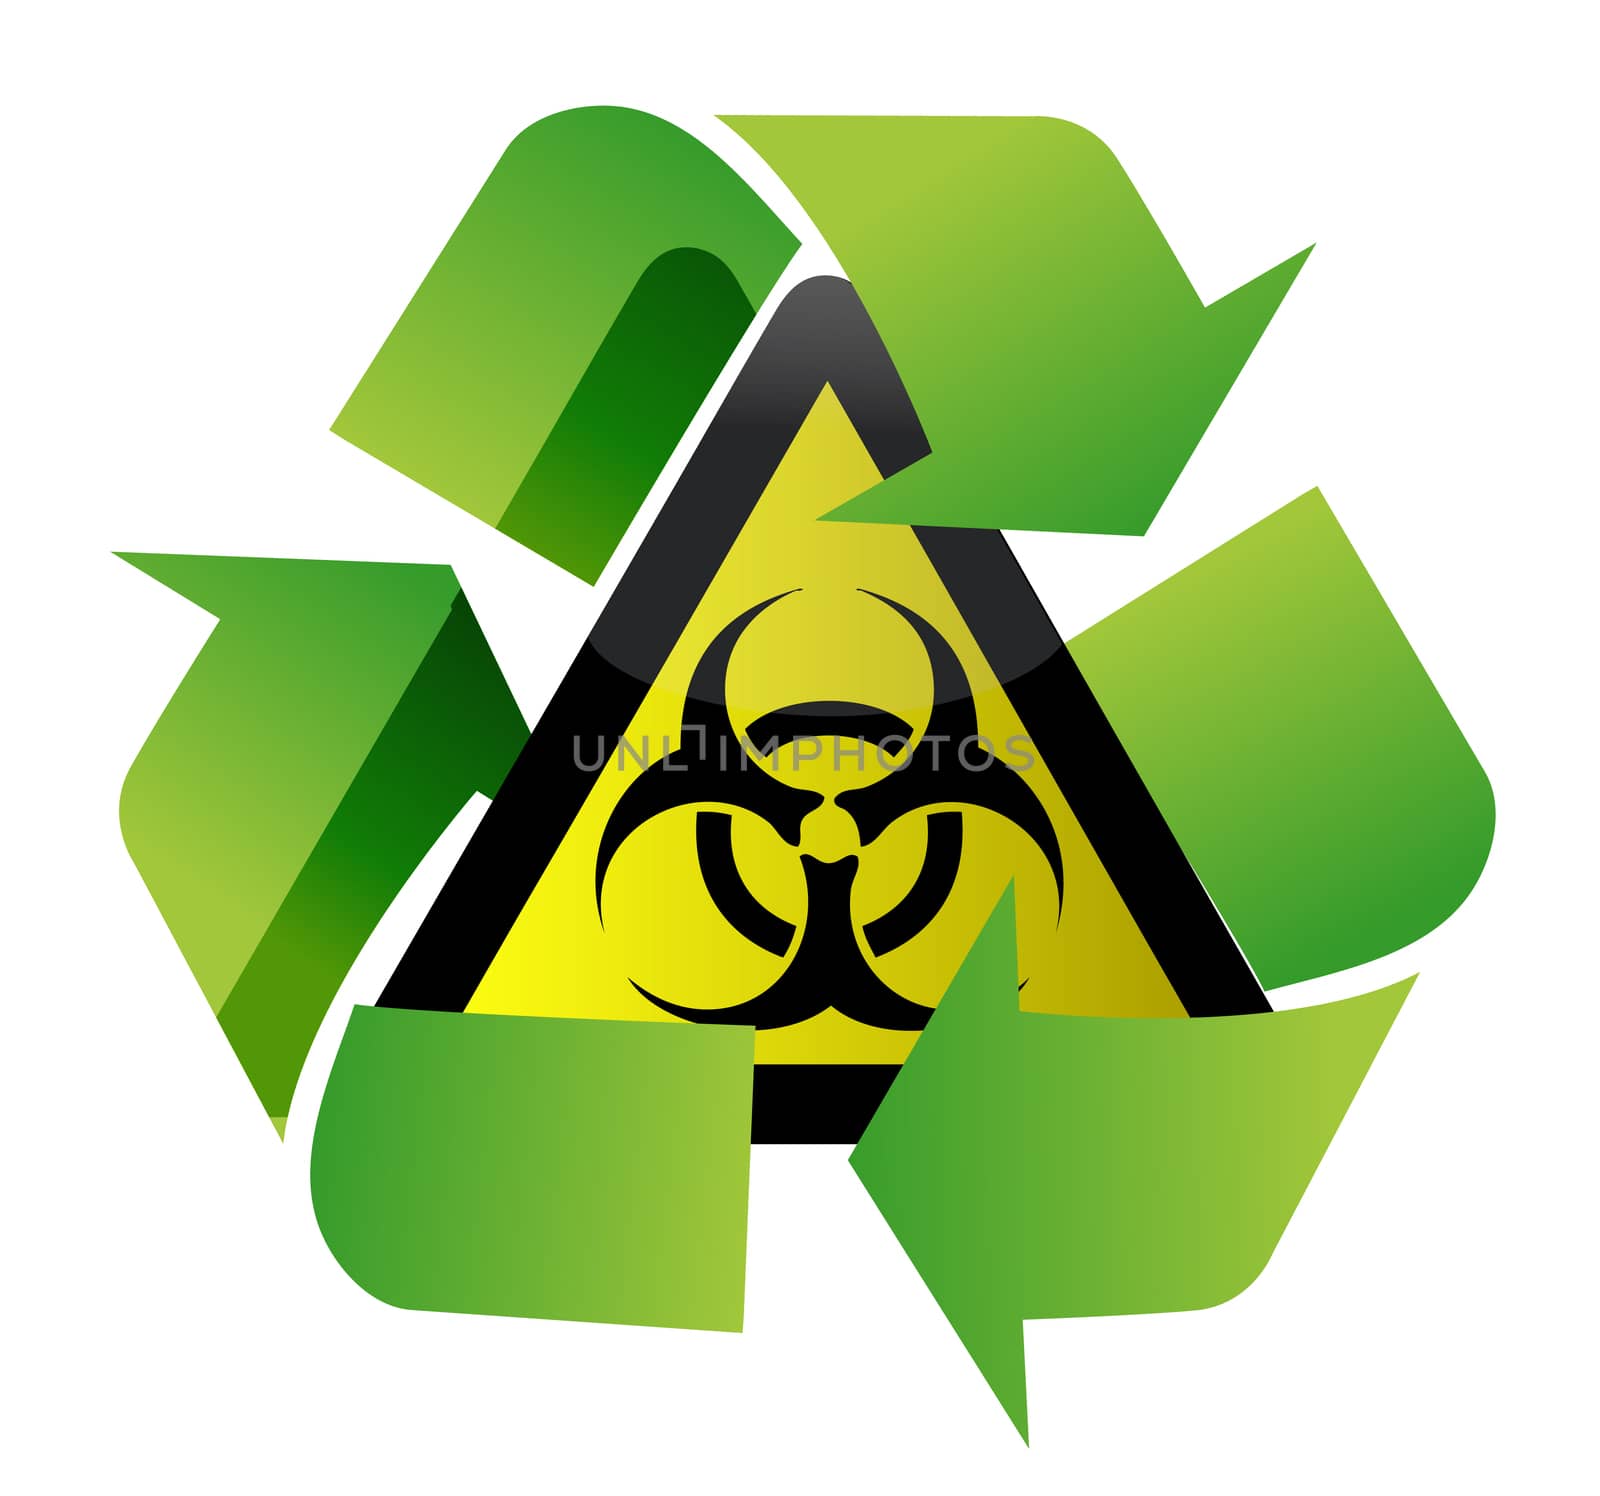 recycle biohazard sign illustration design over white background